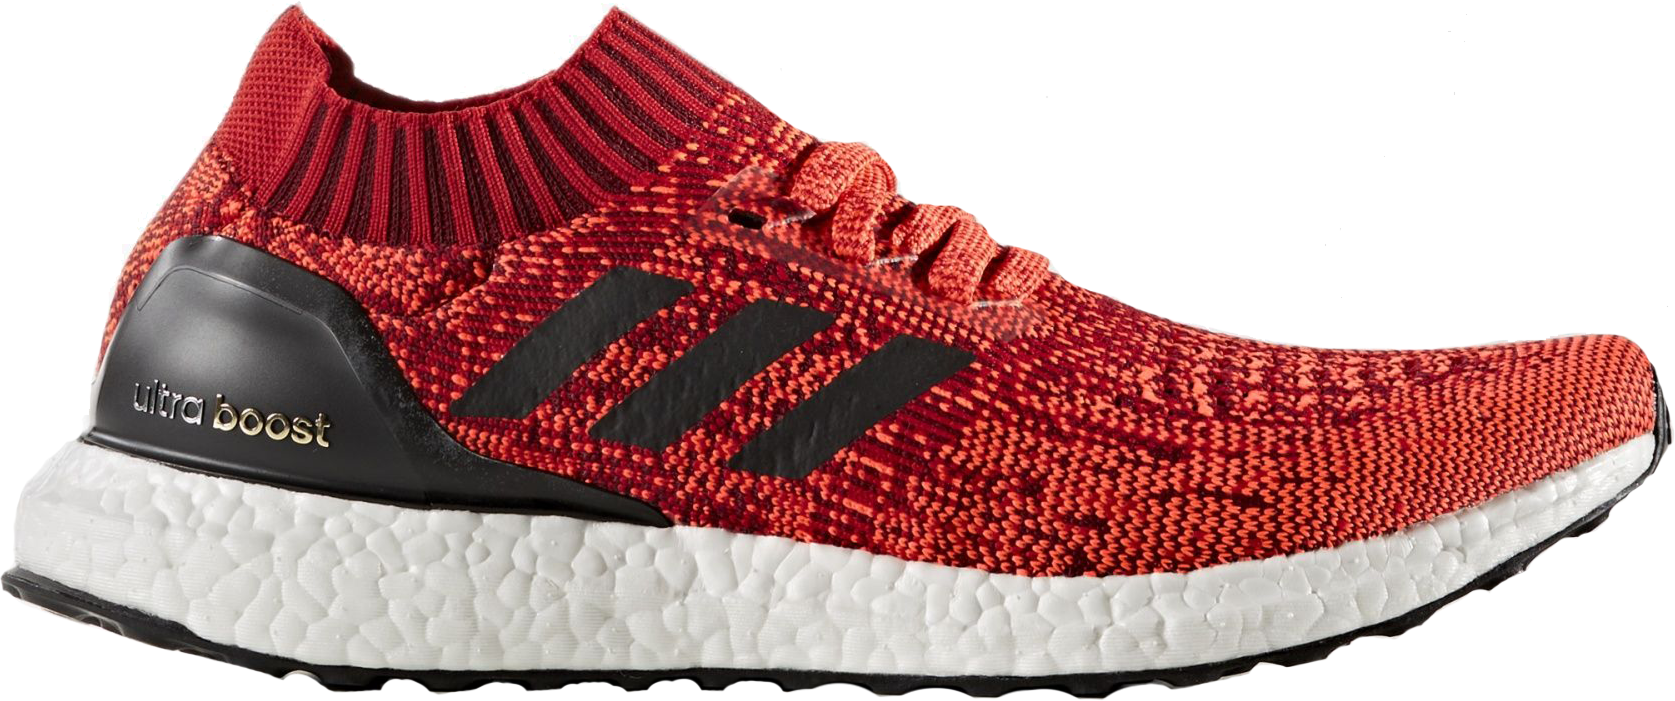 adidas ultra boost red uncaged